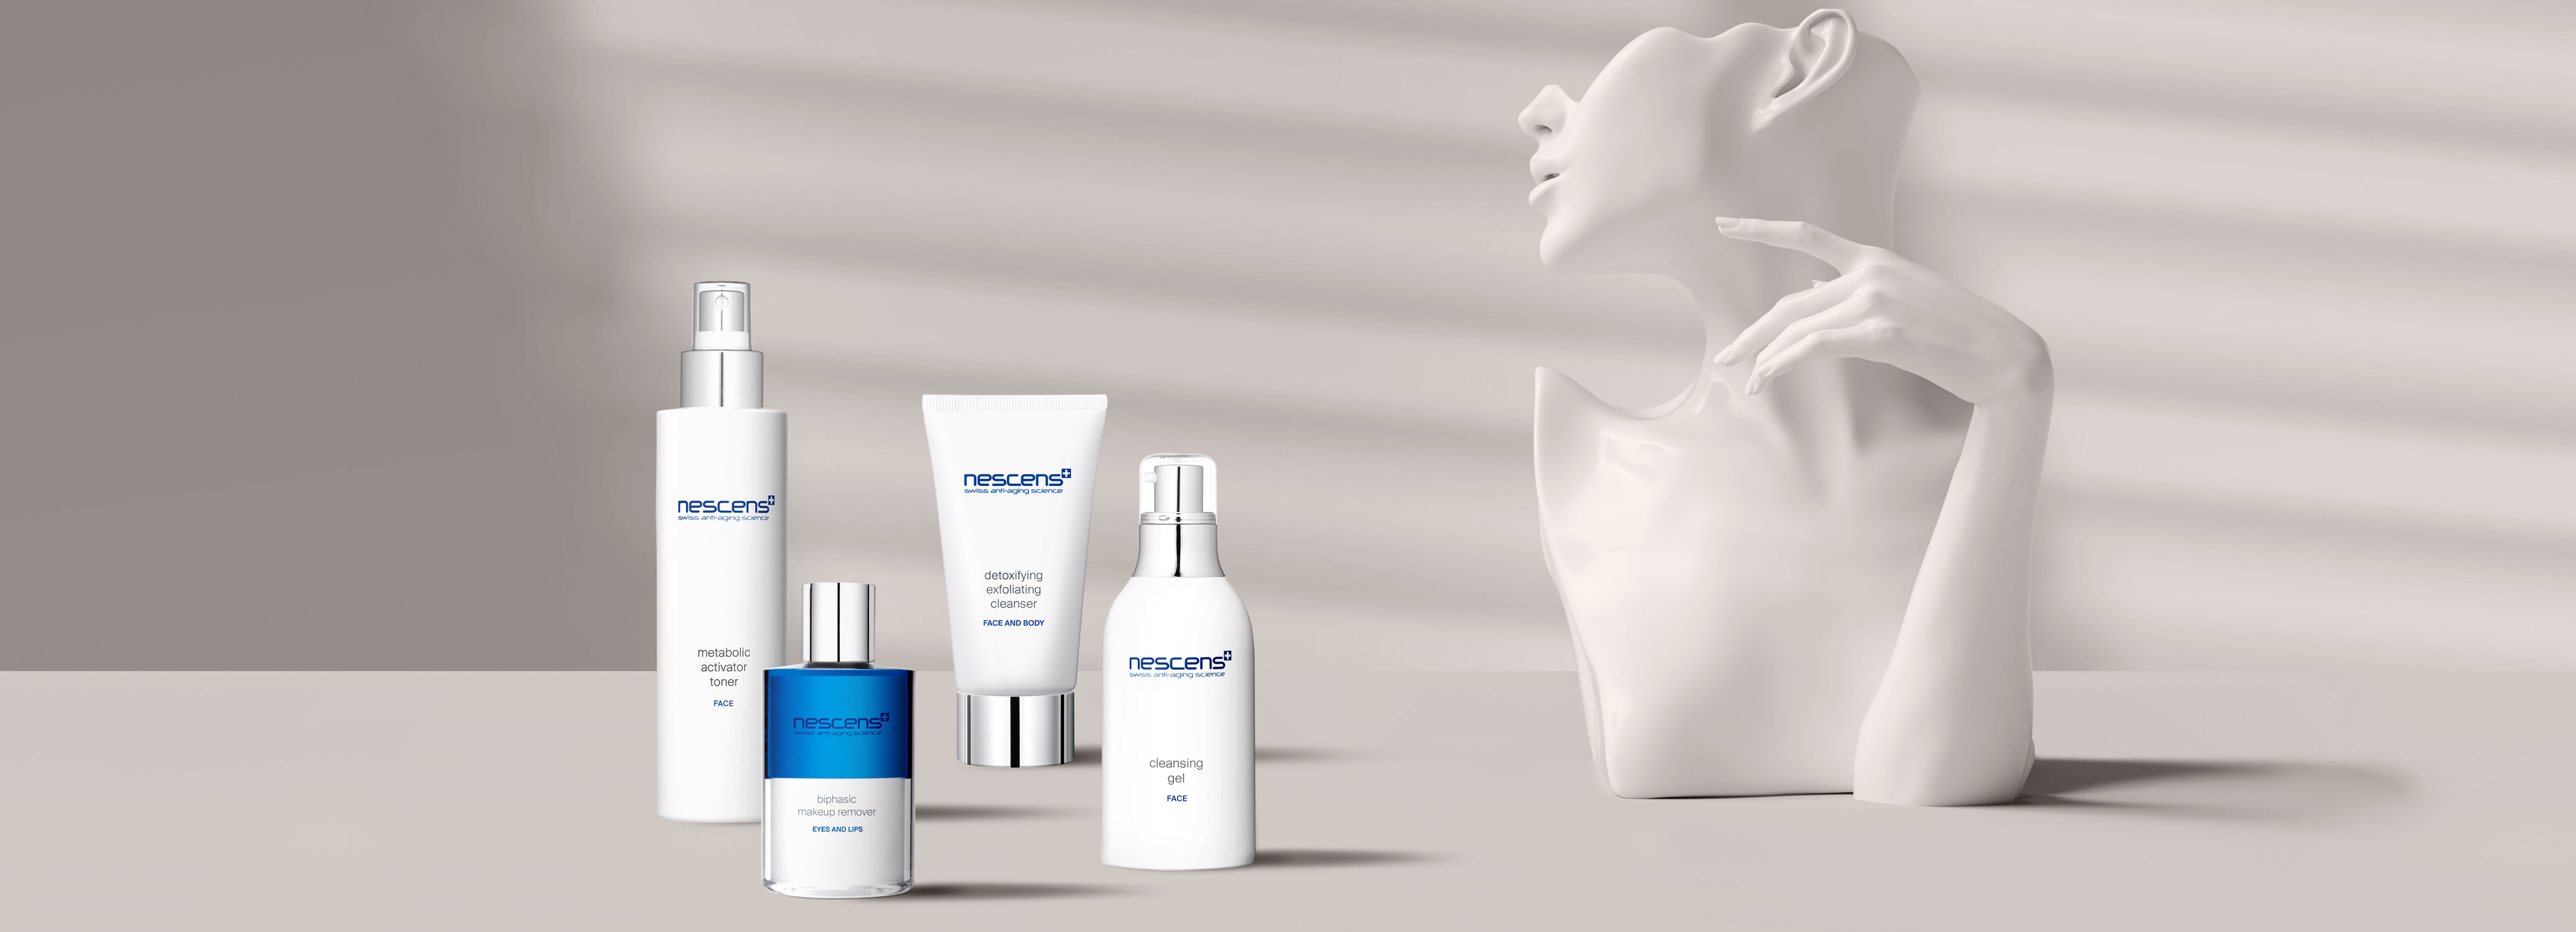 aout suisse anti aging